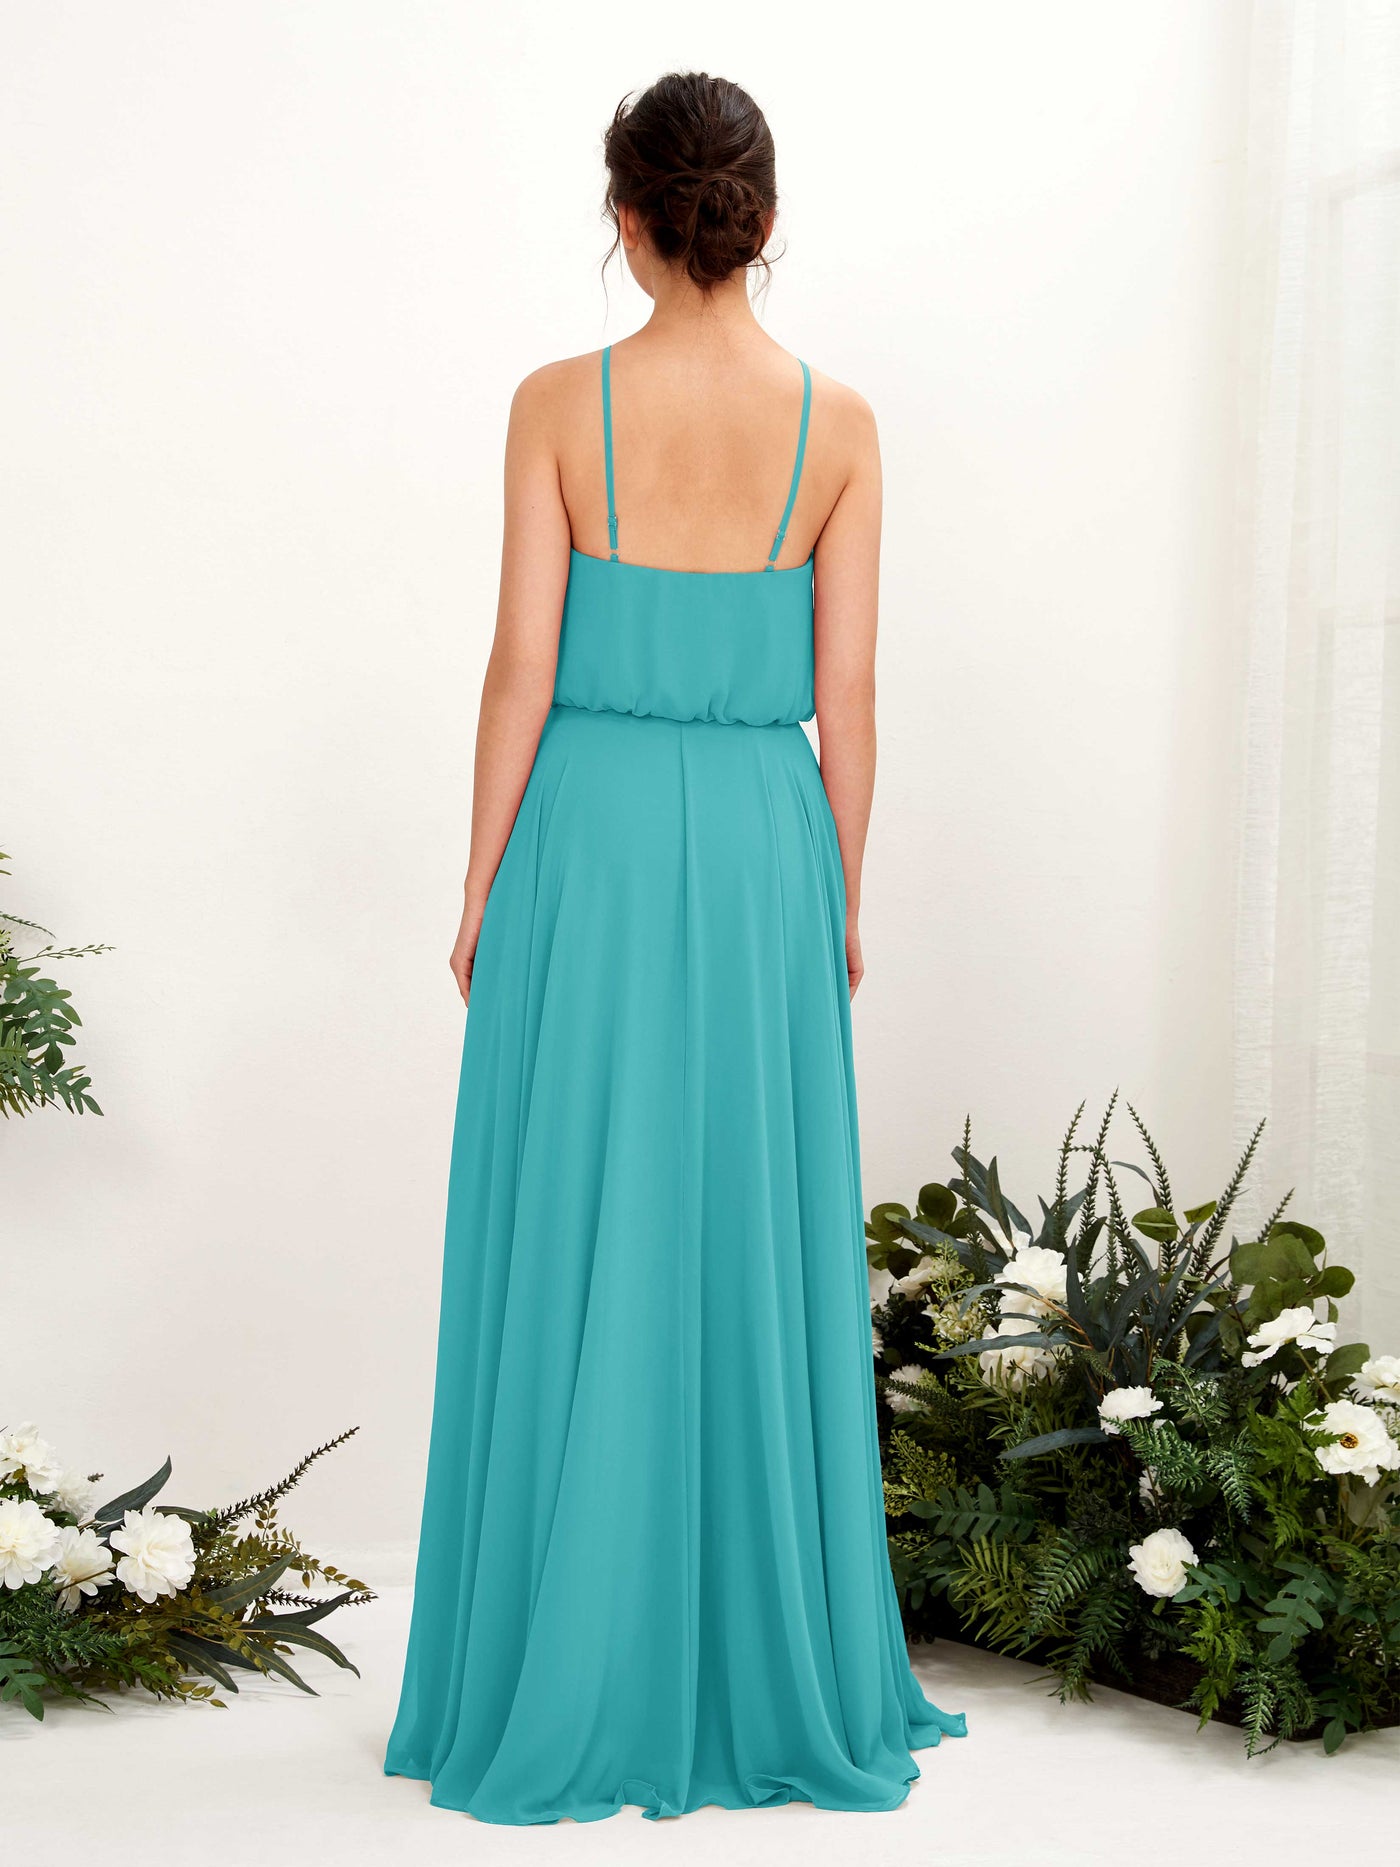 Turquoise Bridesmaid Dresses Bridesmaid Dress Ball Gown Chiffon Halter Full Length Sleeveless Wedding Party Dress (81223423)#color_turquoise